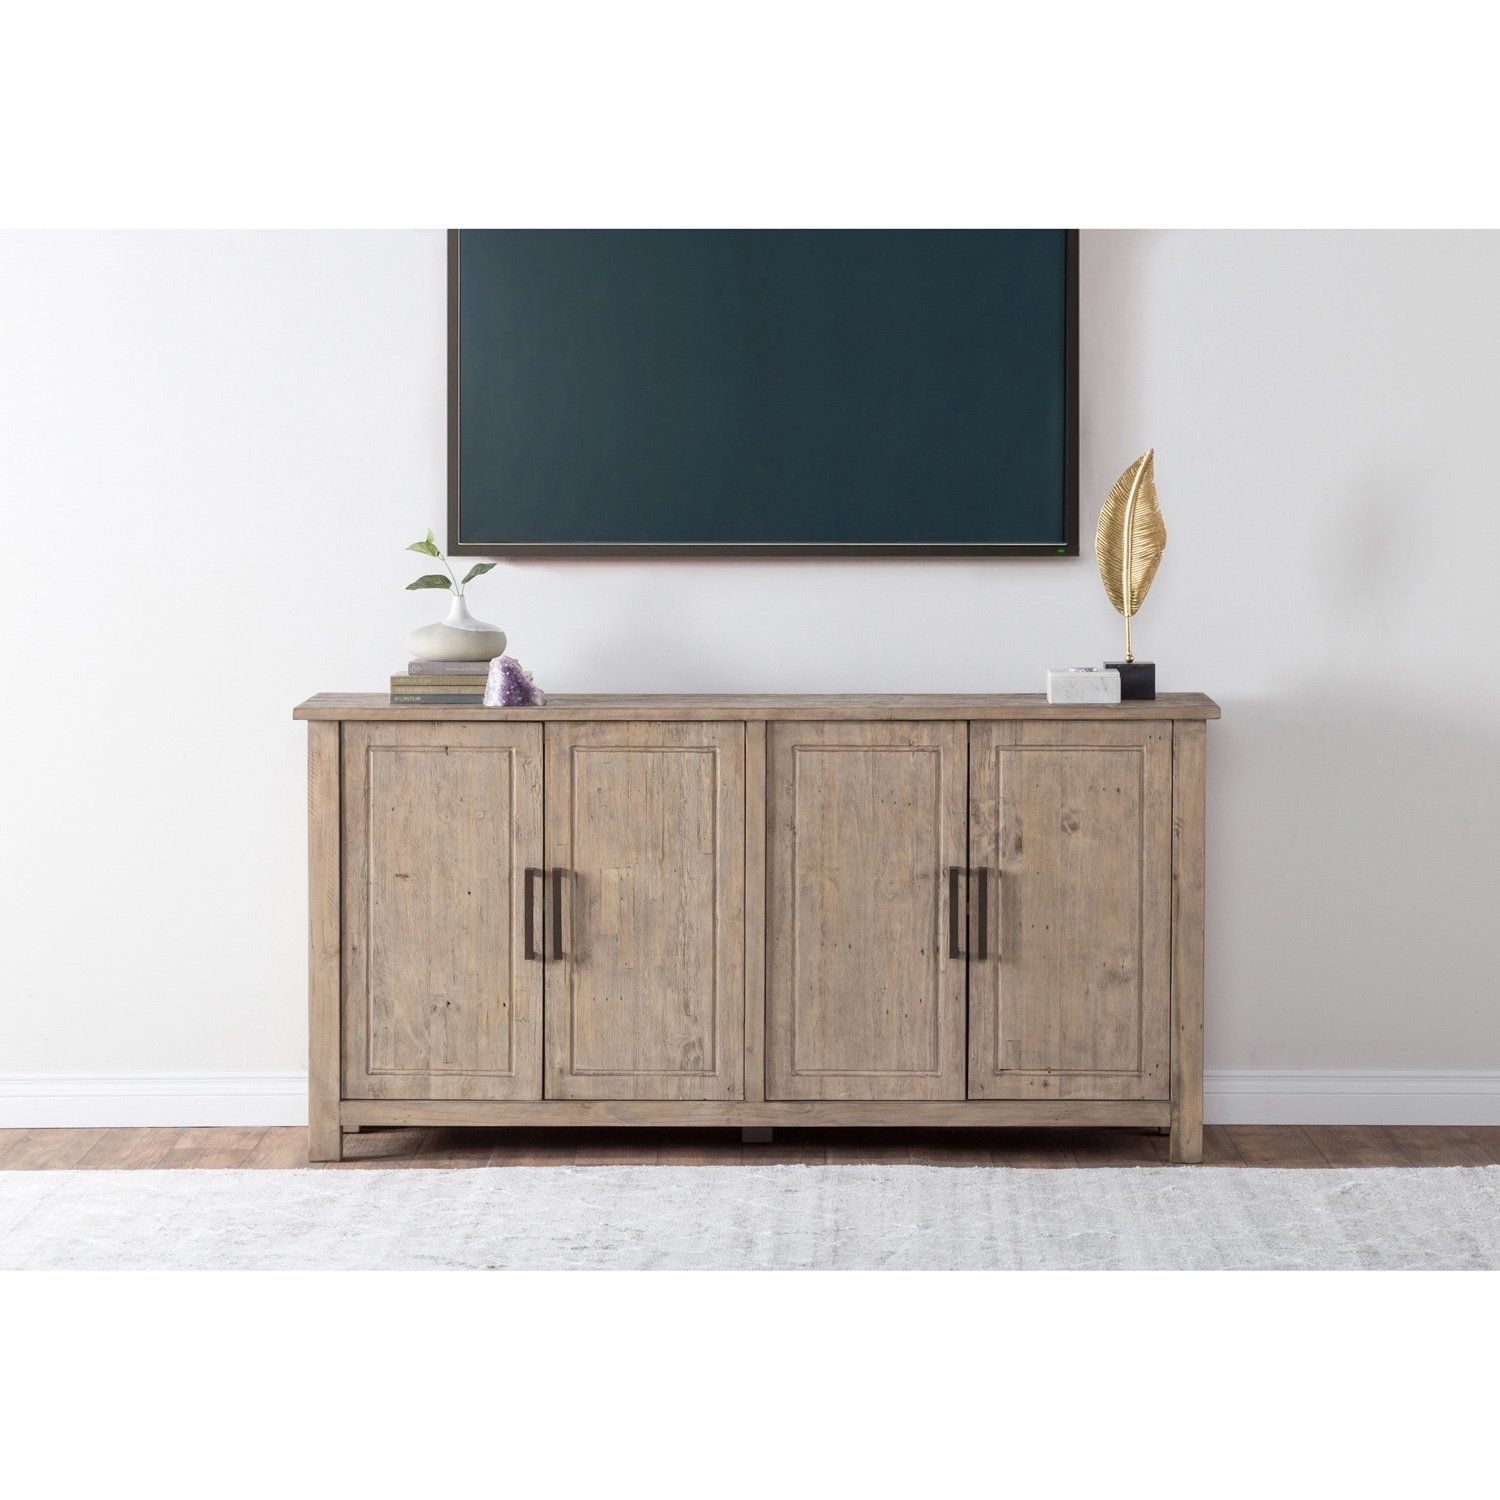 Shop Aires Reclaimed Wood 72 Inch Sideboardkosas Home – Free For Most Recent Brown Wood 72 Inch Sideboards (View 9 of 20)